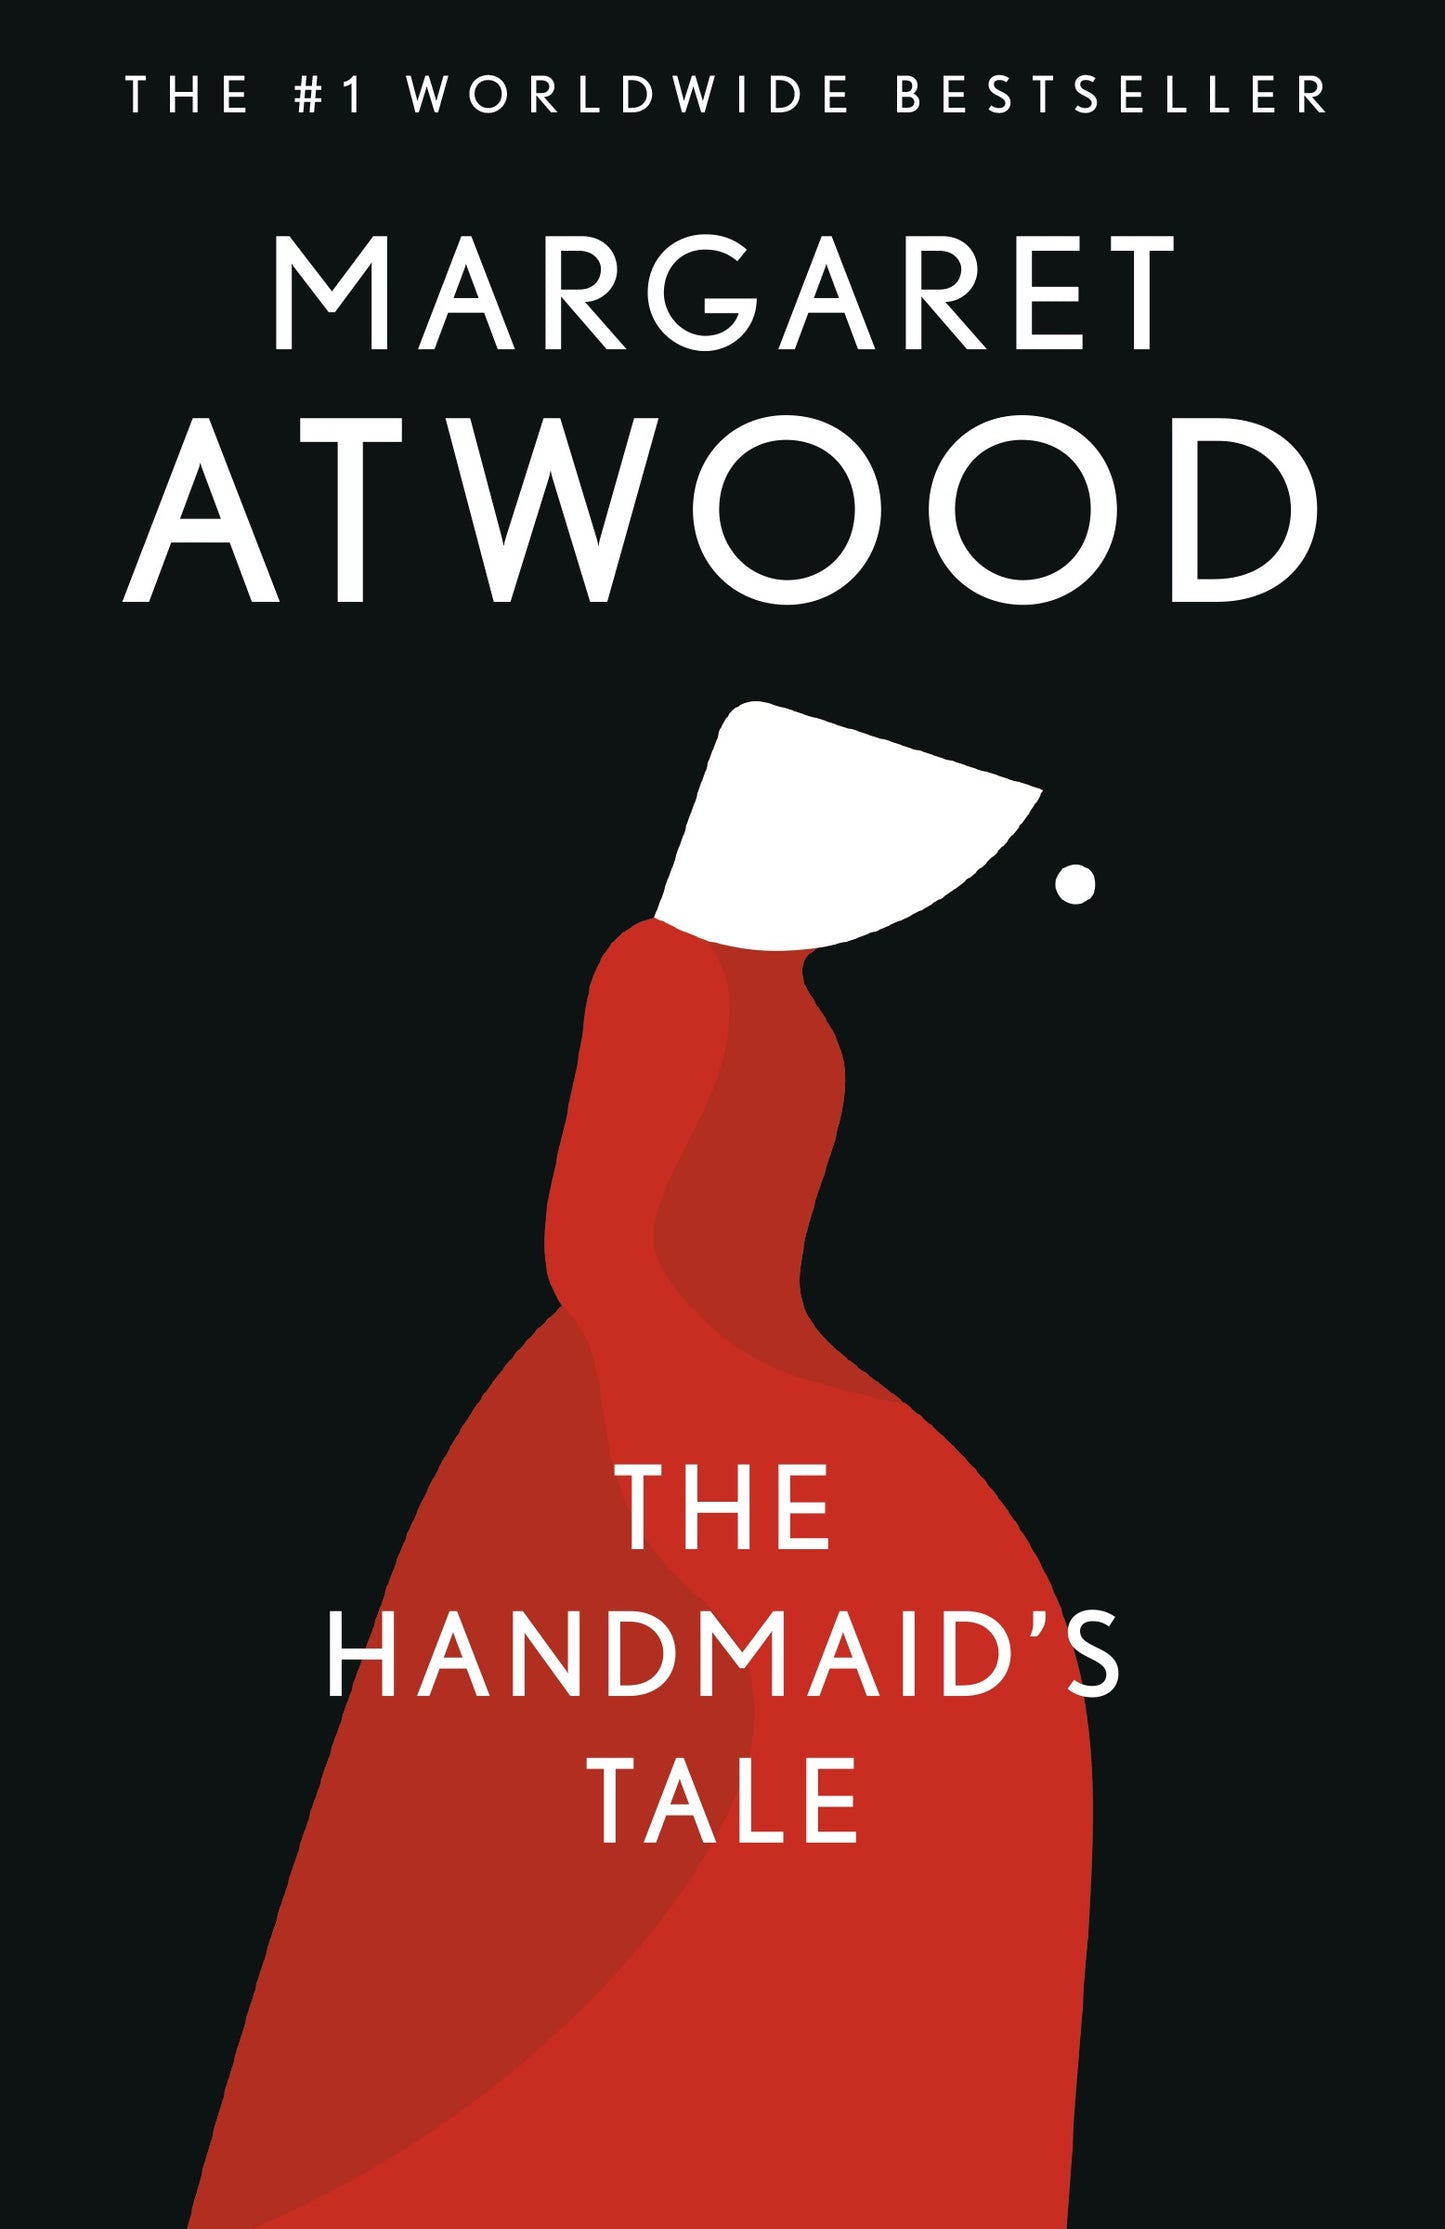 The Handmaid’s Tale - Margaret Atwood